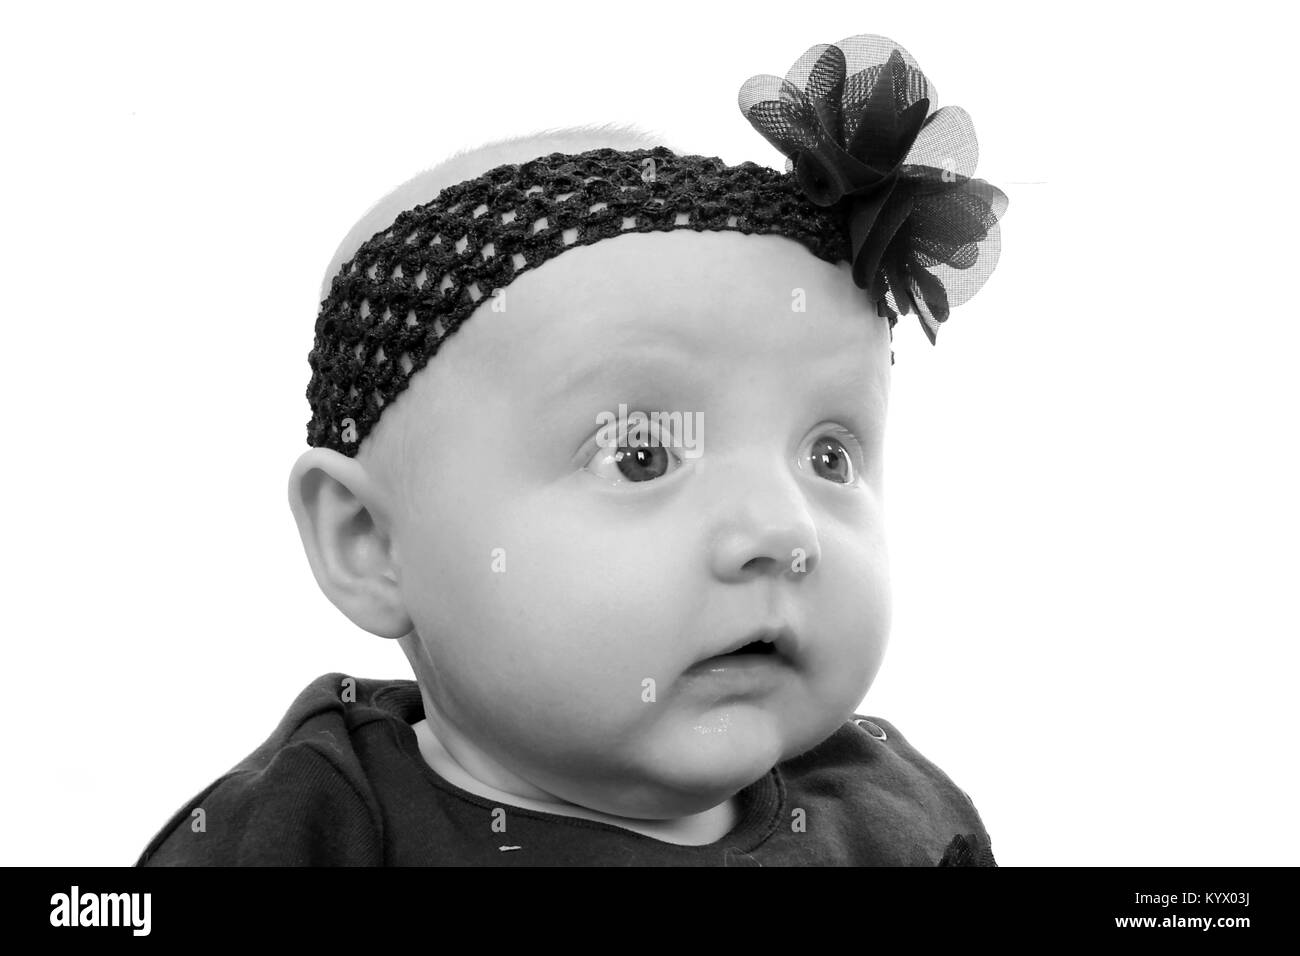 5 month old baby girl with in black dress sitting up Stock Photo